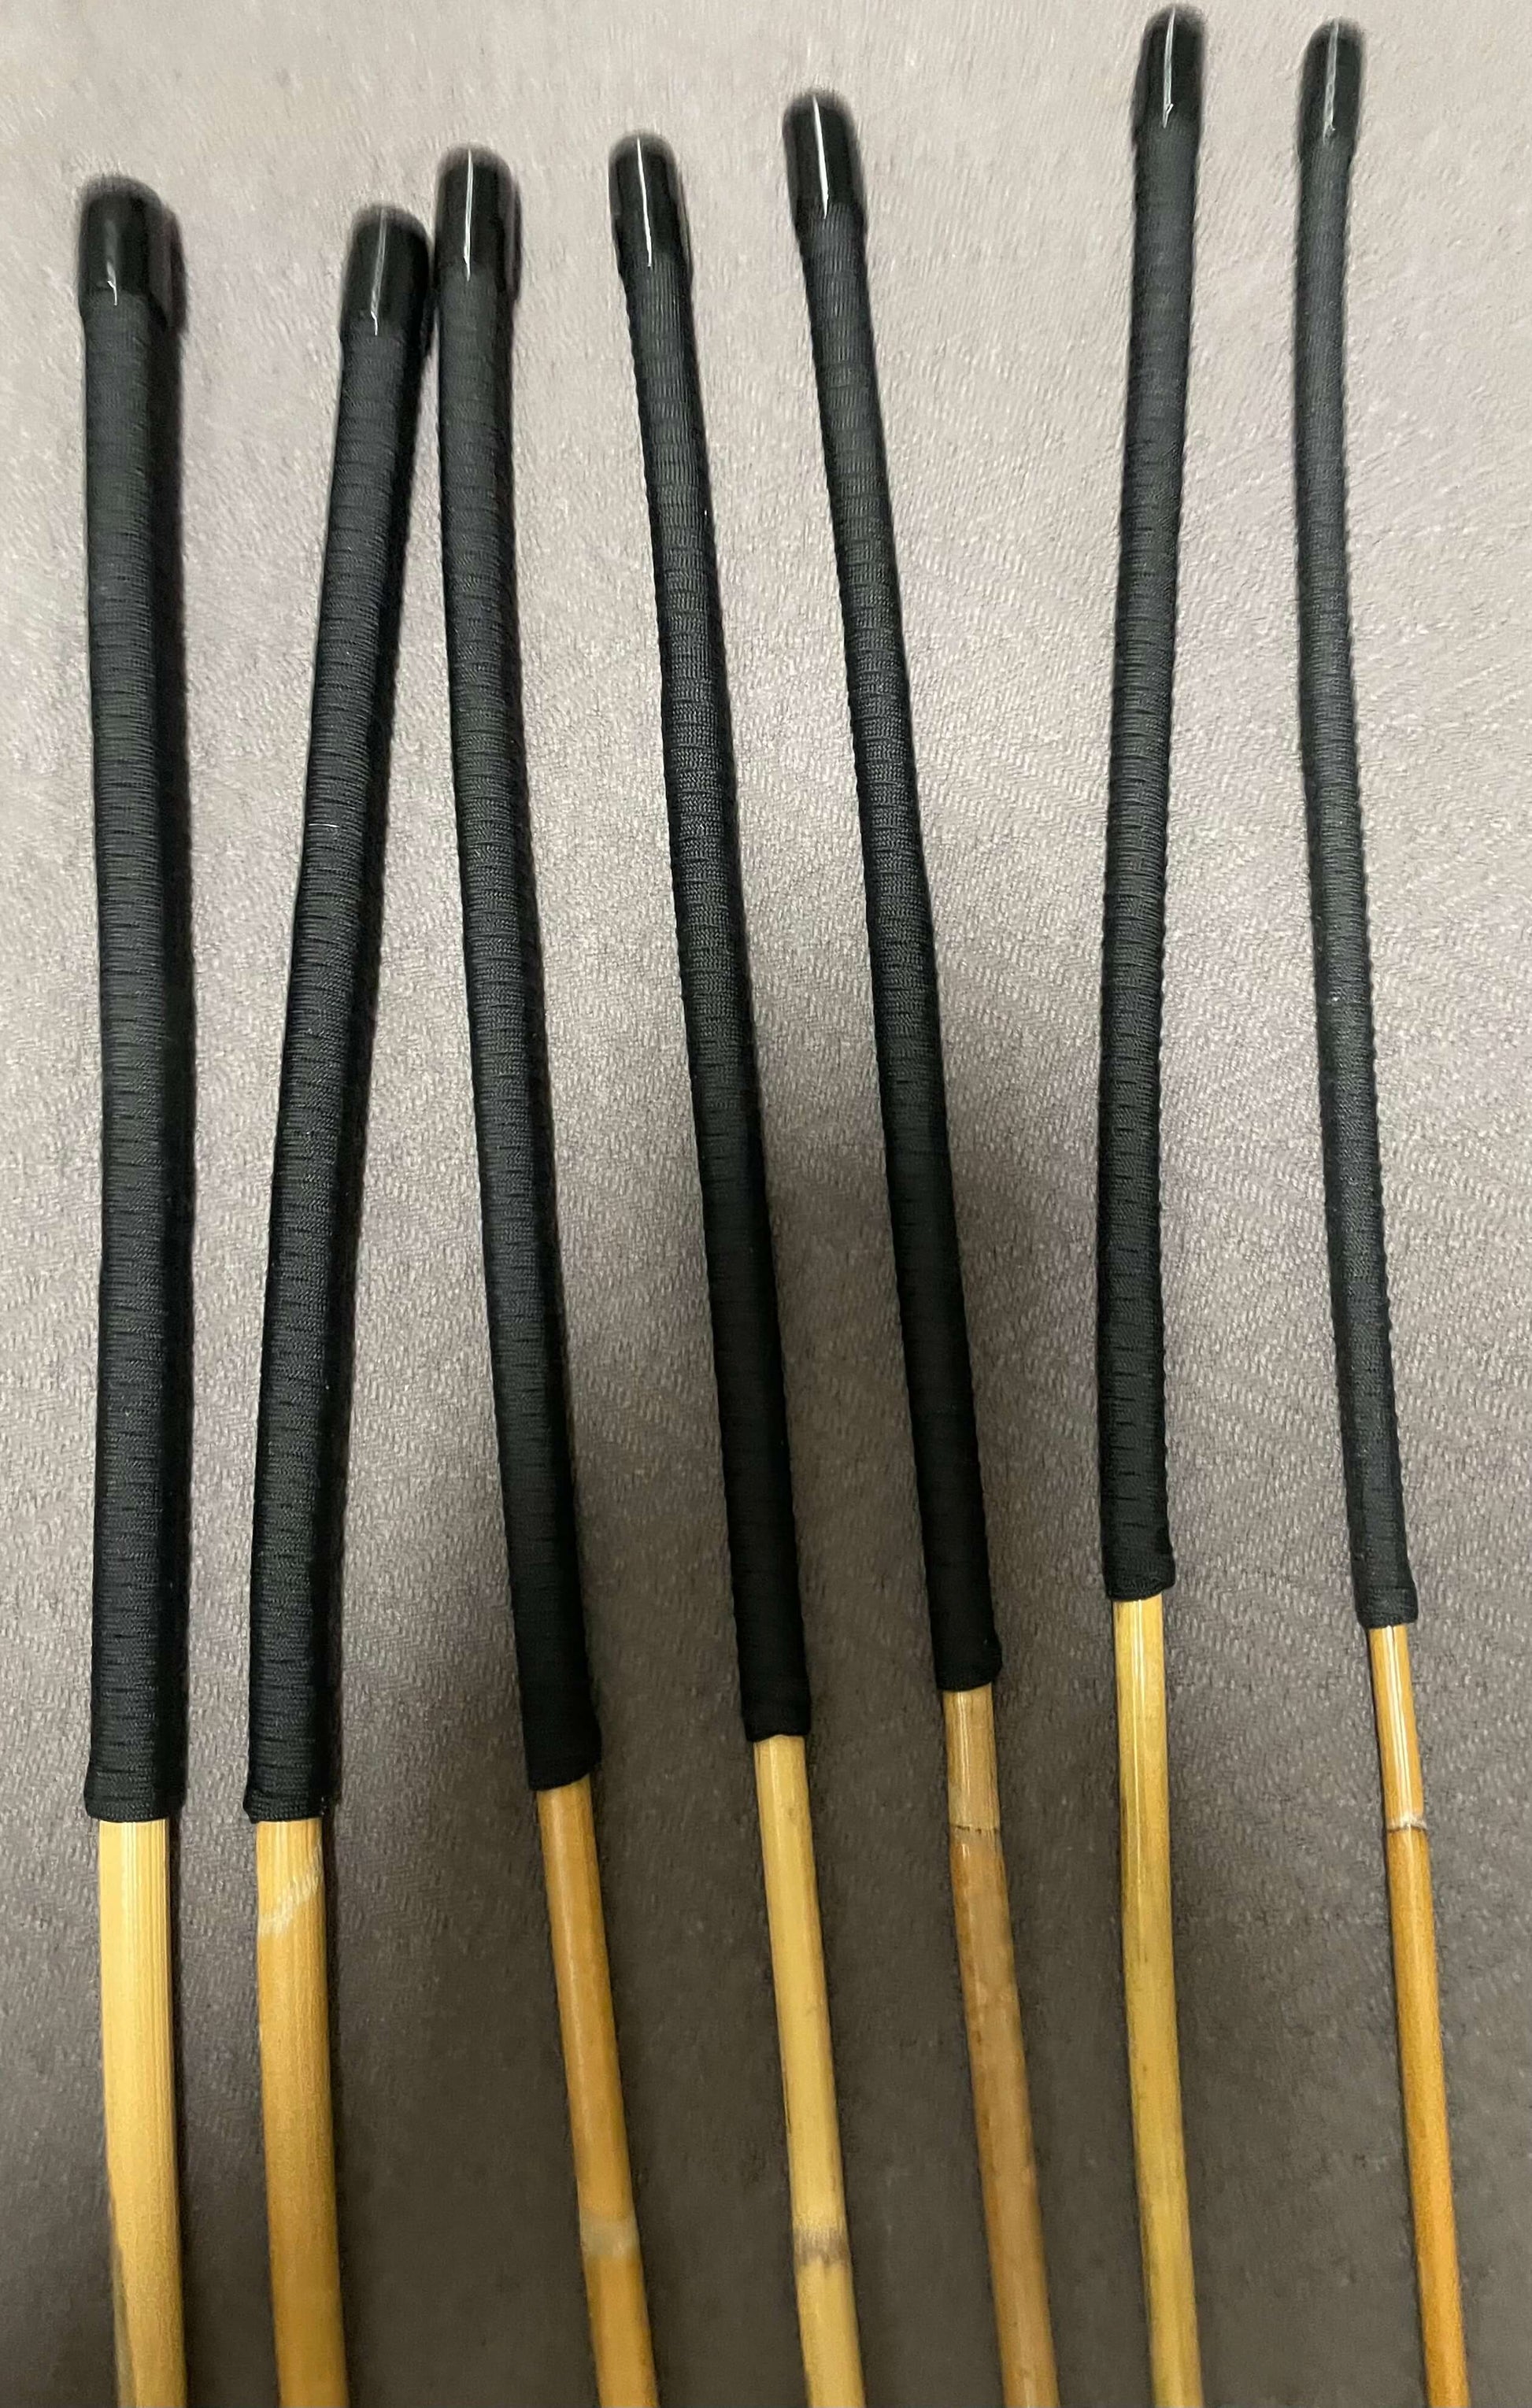 Set of 7 Kooboo Rattan Punishment canes / School Canes / BDSM Canes with Black Paracord Handles -- 72 to 87 cms Length - Englishvice Canes